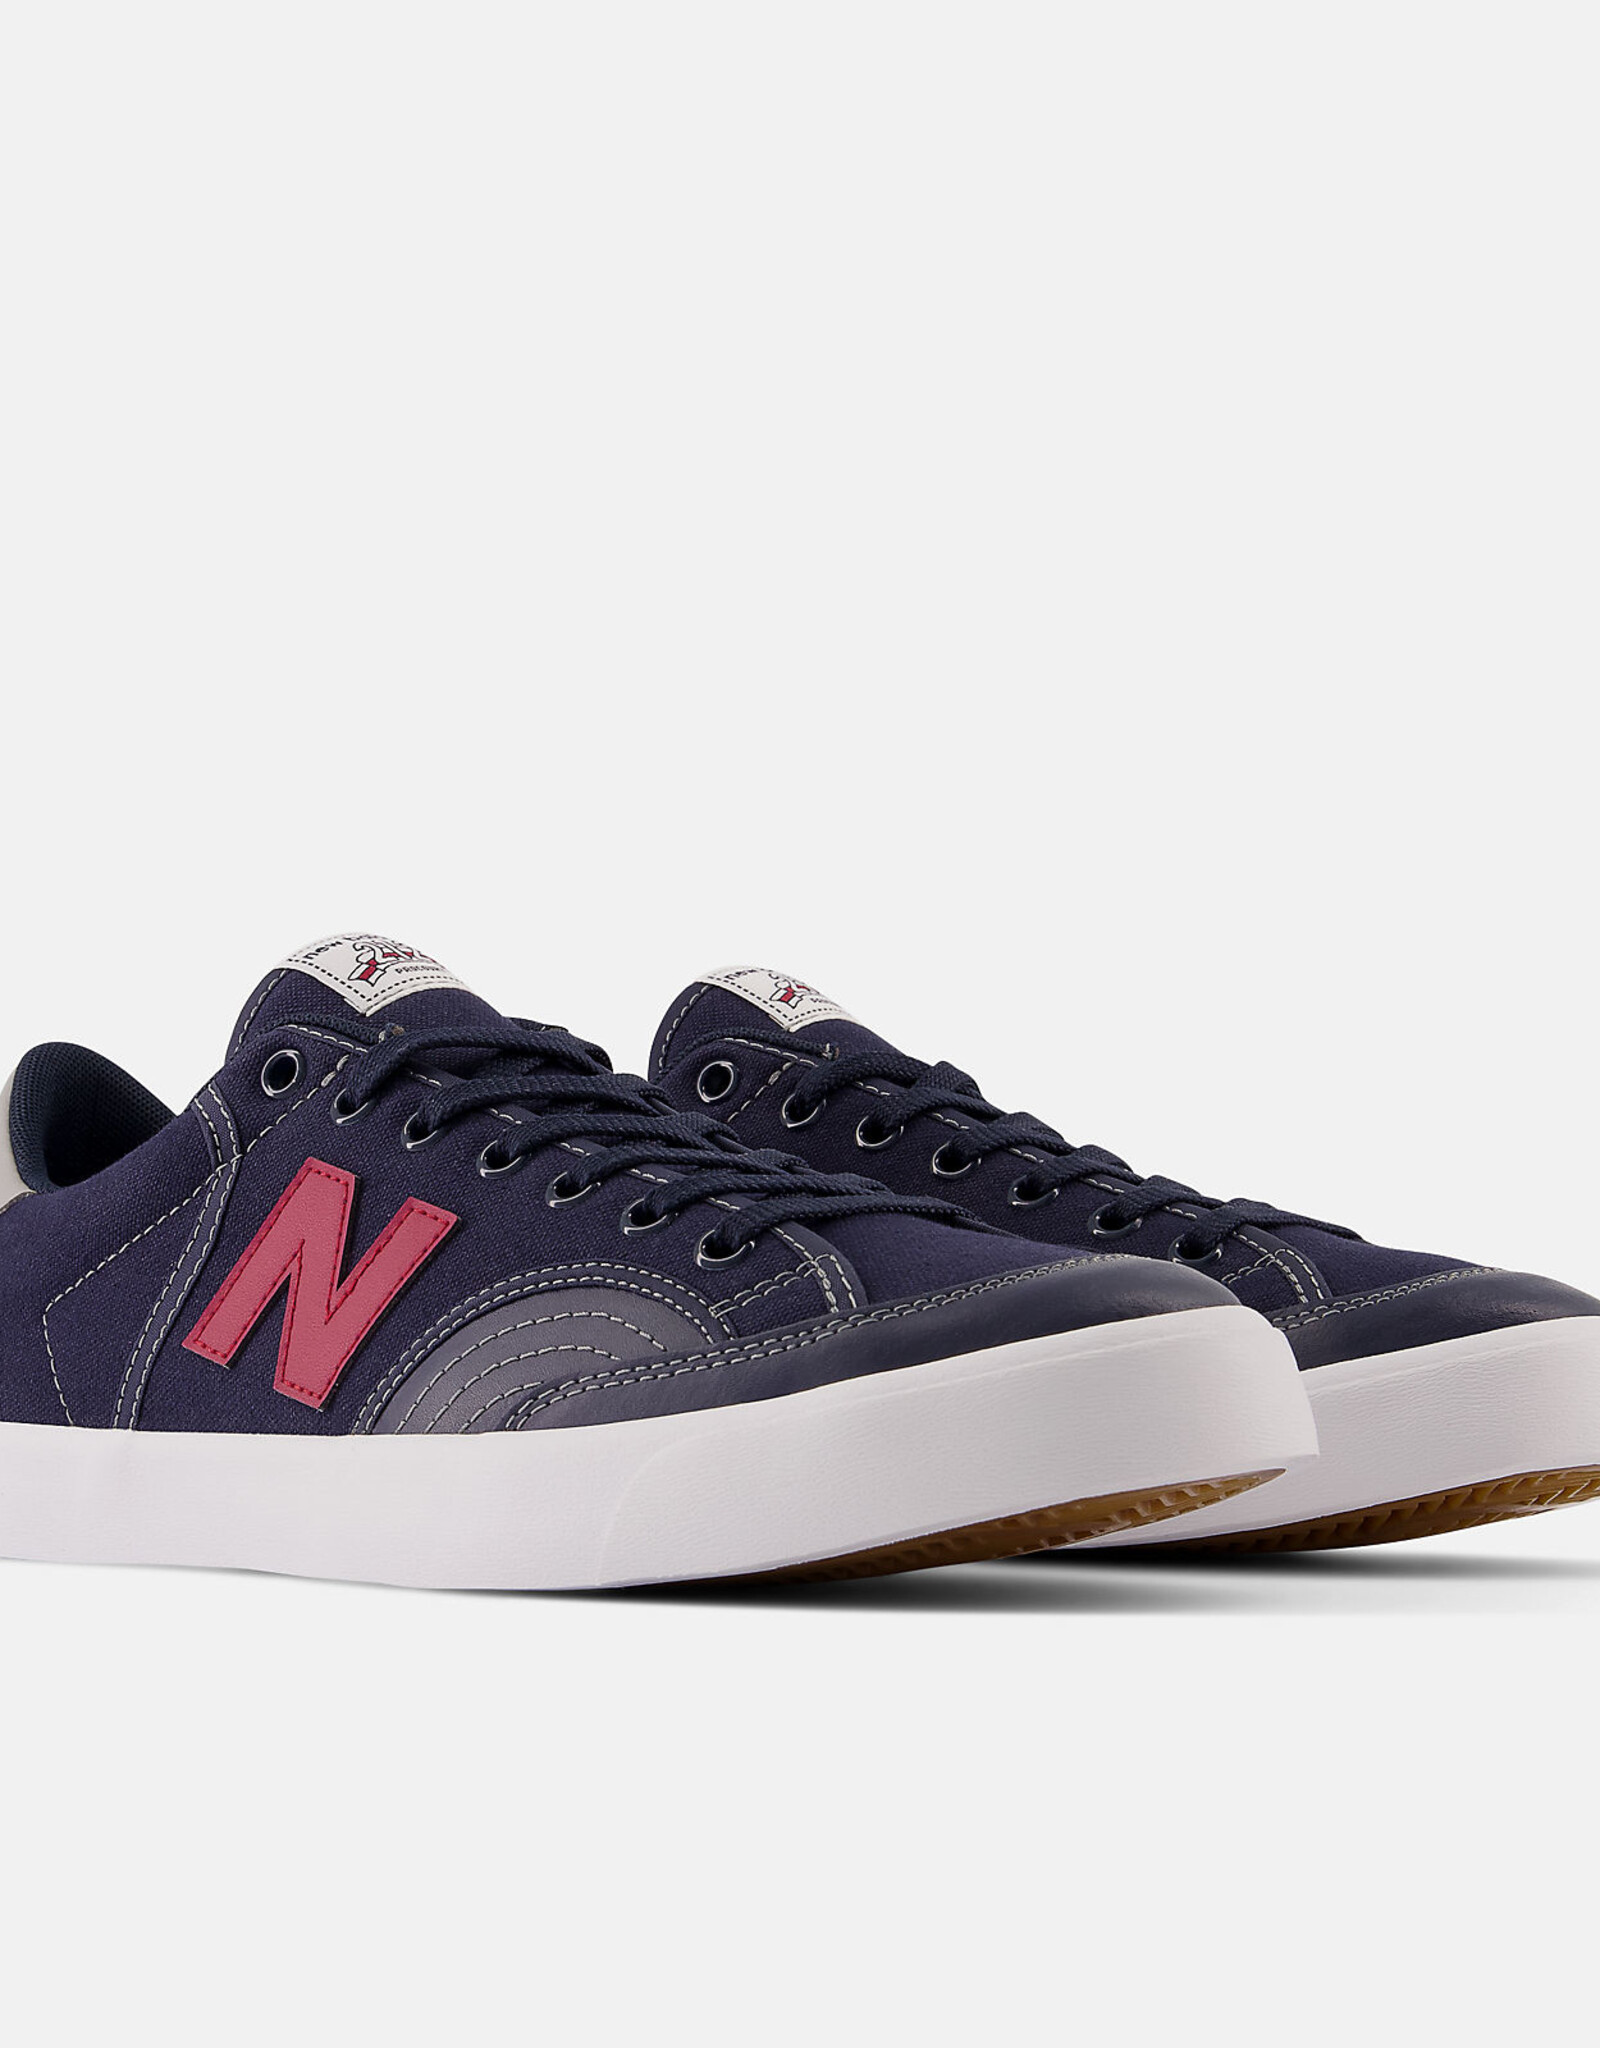 NEW BALANCE SKATE SHOES NEW BALANCE - 212 - NAVY/RED -